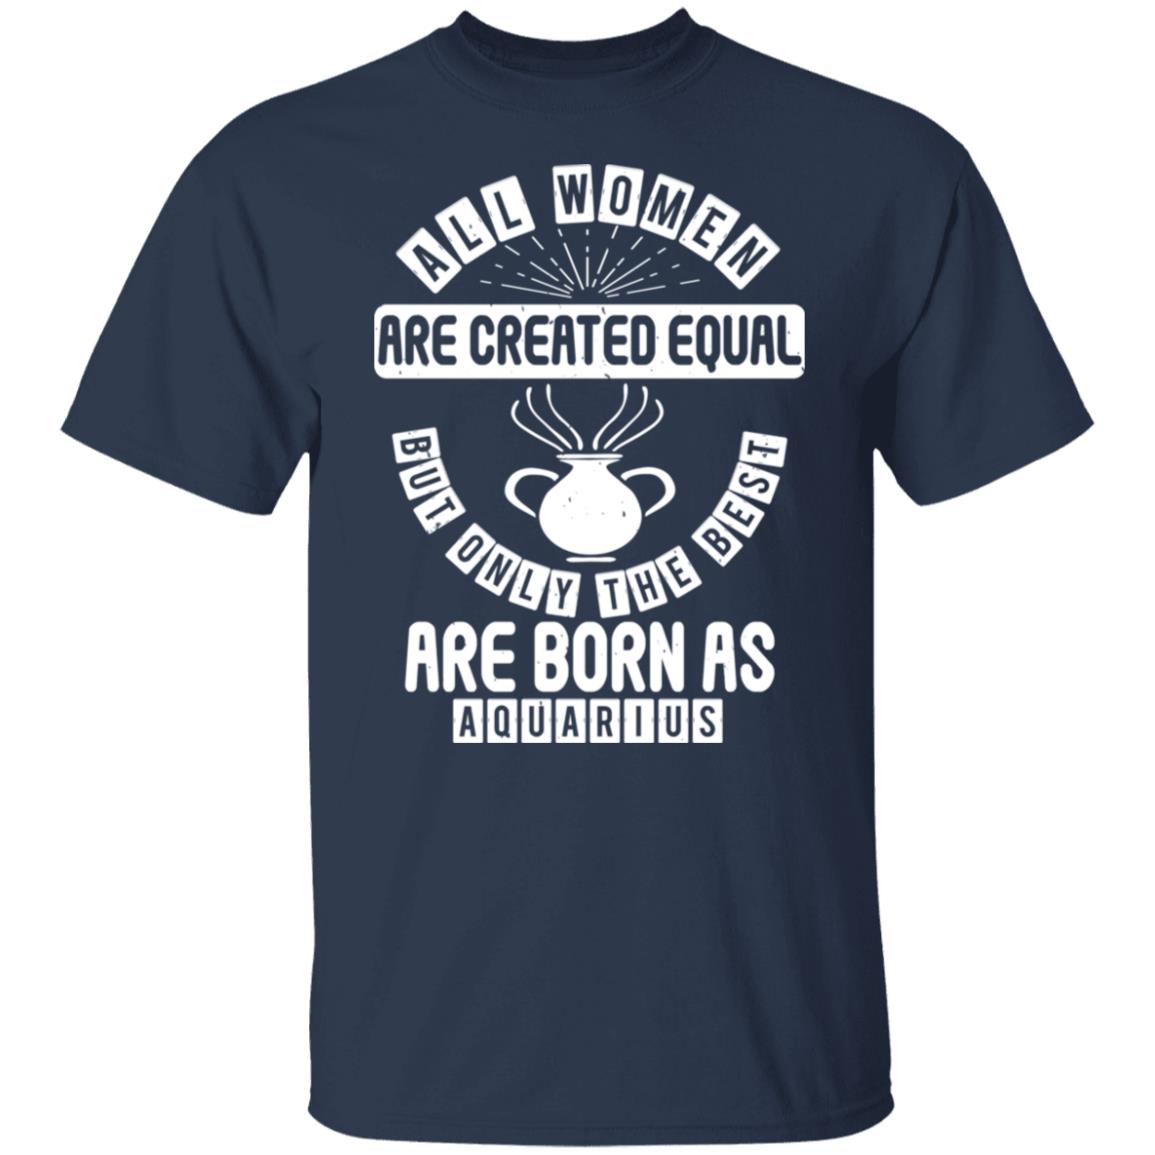 All Women Are Created Equal But Only The Best Are Born as Aquarius Birthday Gift Shirt